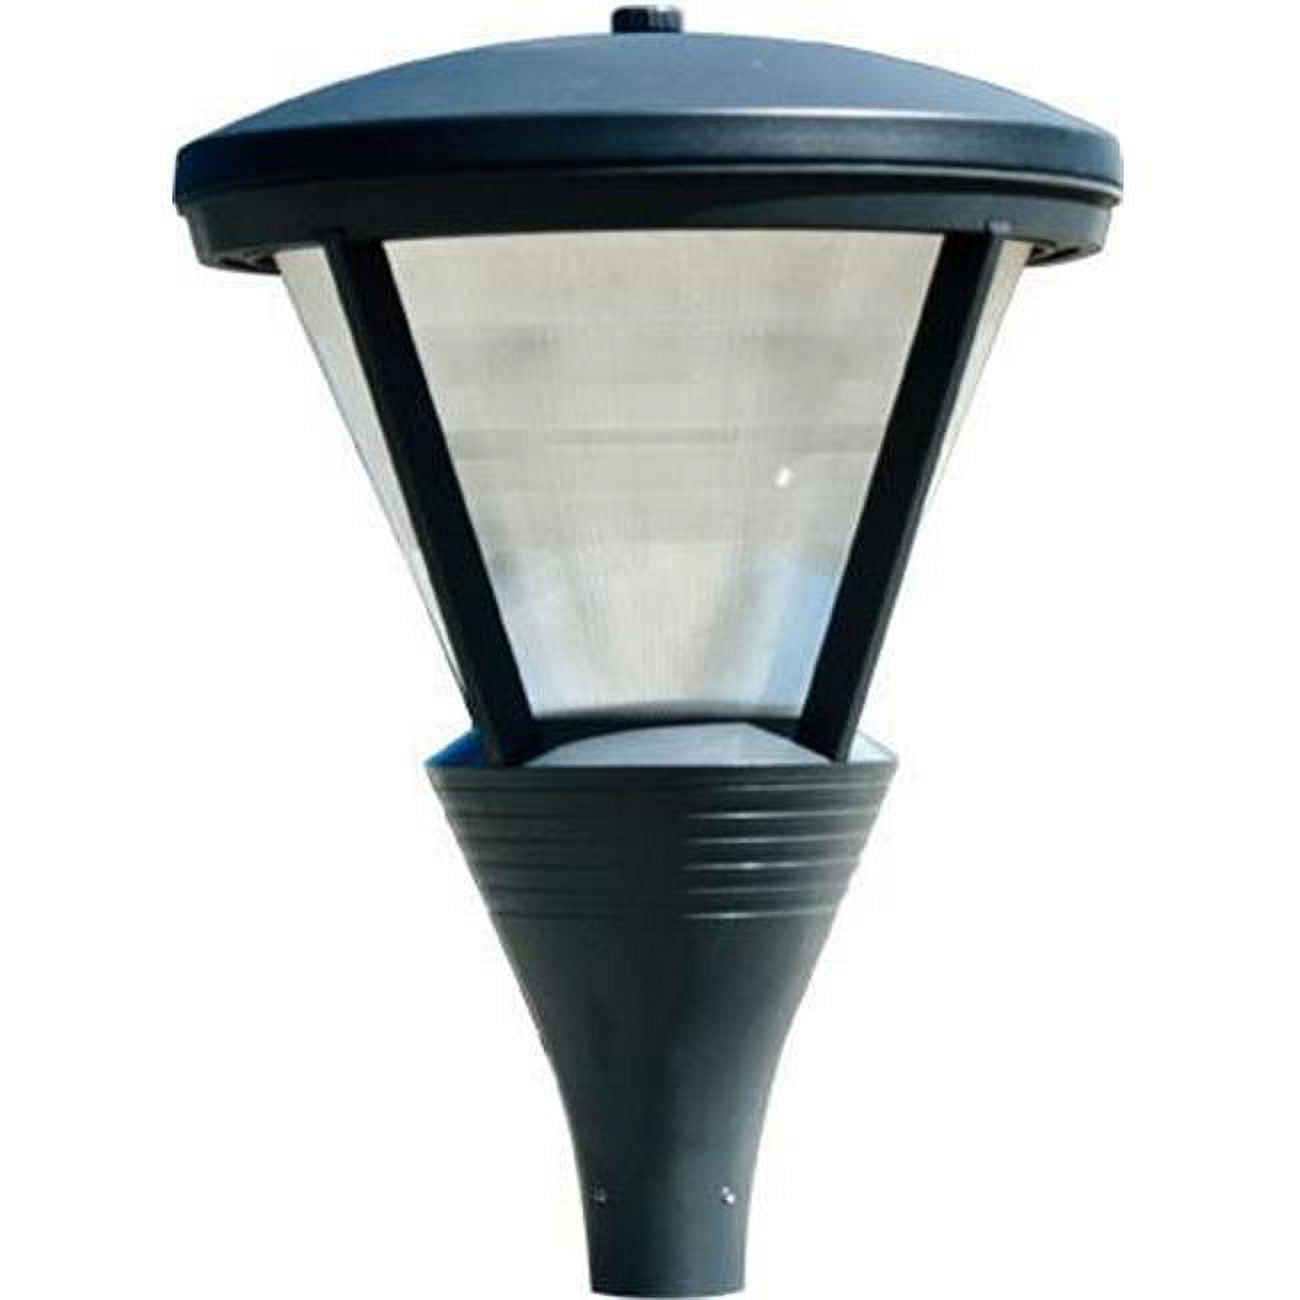 Picture of Dabmar Lighting GM588-B-MT Powder Coated Cast Aluminum Architectural Post Top Light Fixture, Black - 34.50 x 25.25 x 25.25 in.